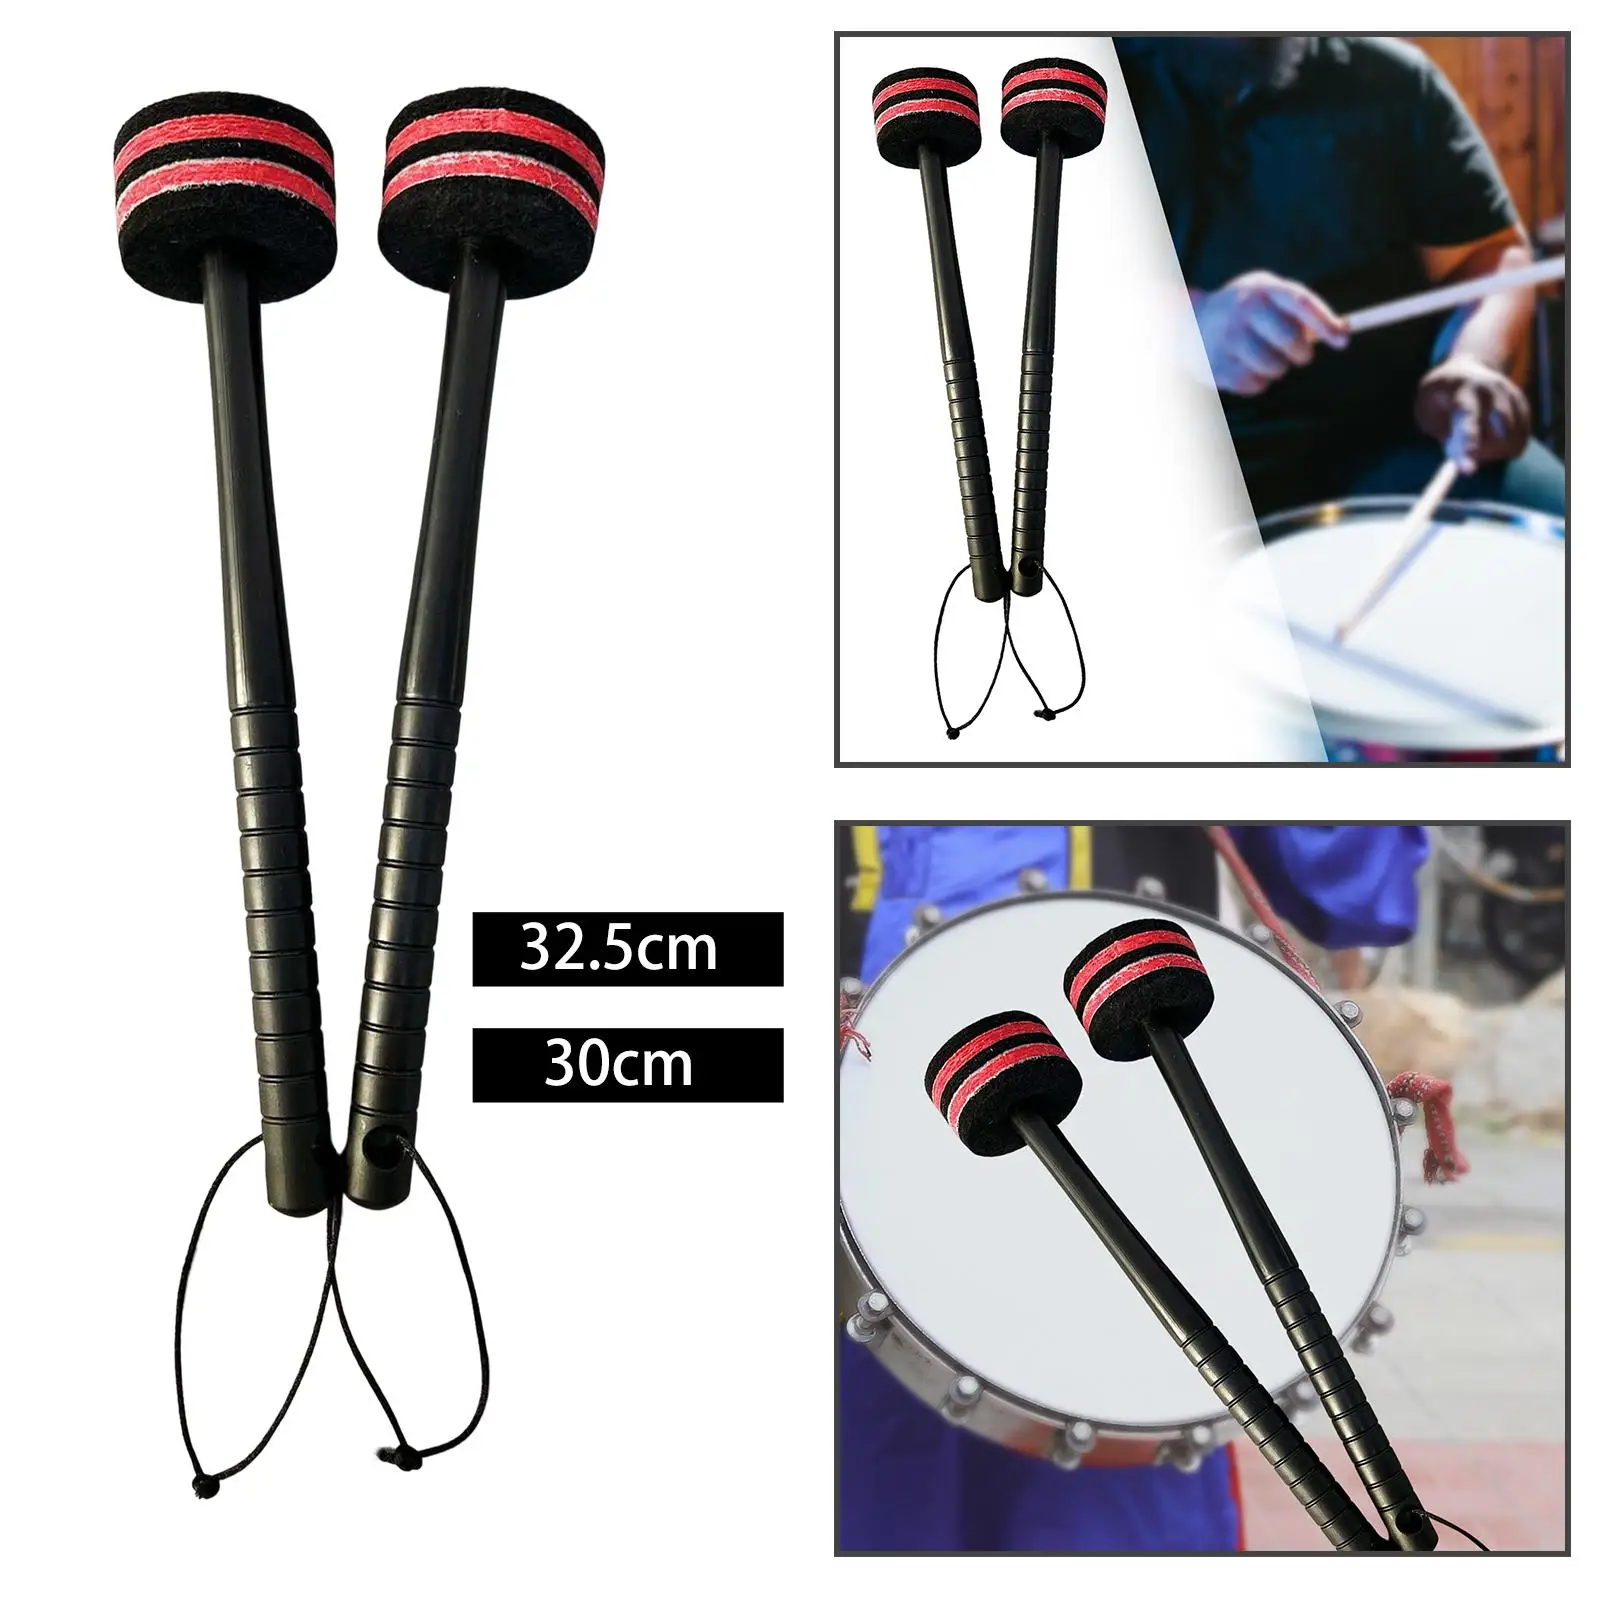 2x Snare Drum Mallet Musical Instrument Accessories Felt Mallet Timpani Mallet Timpani Stick for Child Drummers Adults